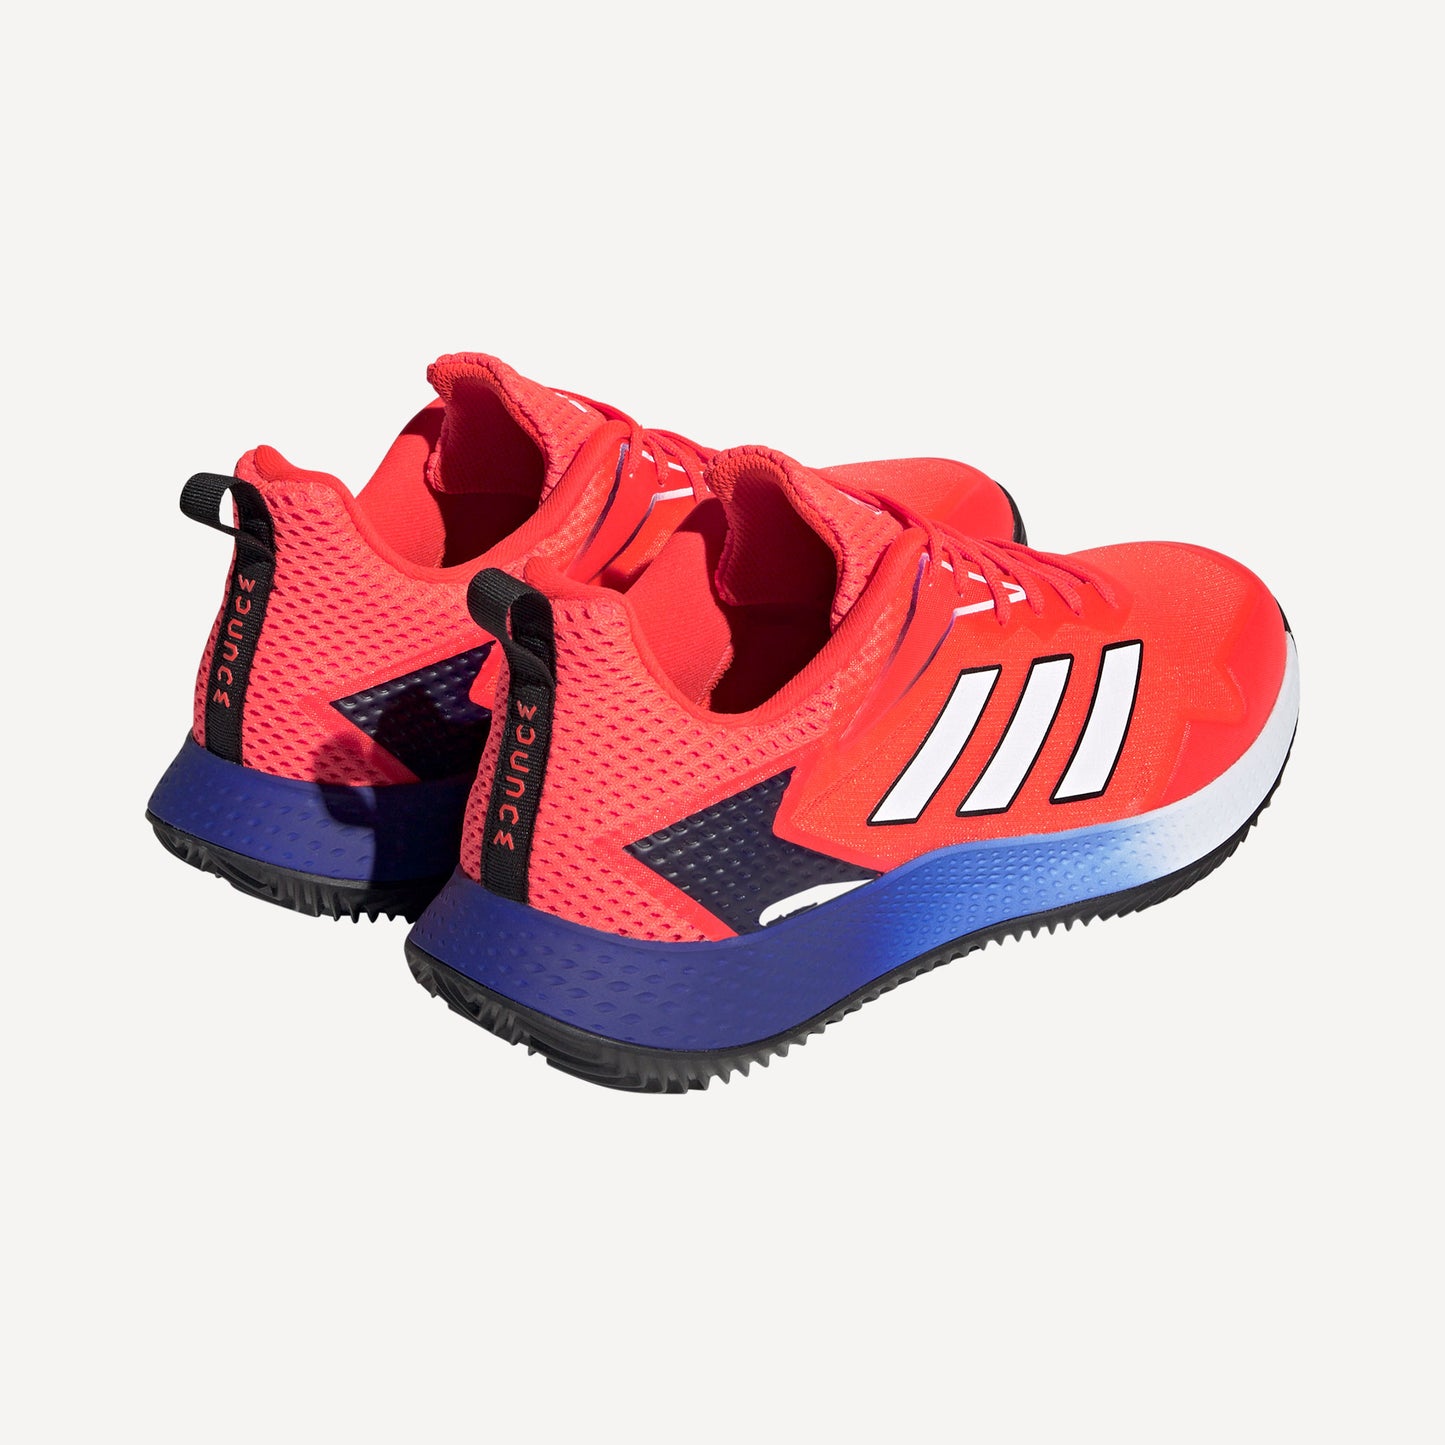 adidas Defiant Speed Men's Clay Court Tennis Shoes Red (6)